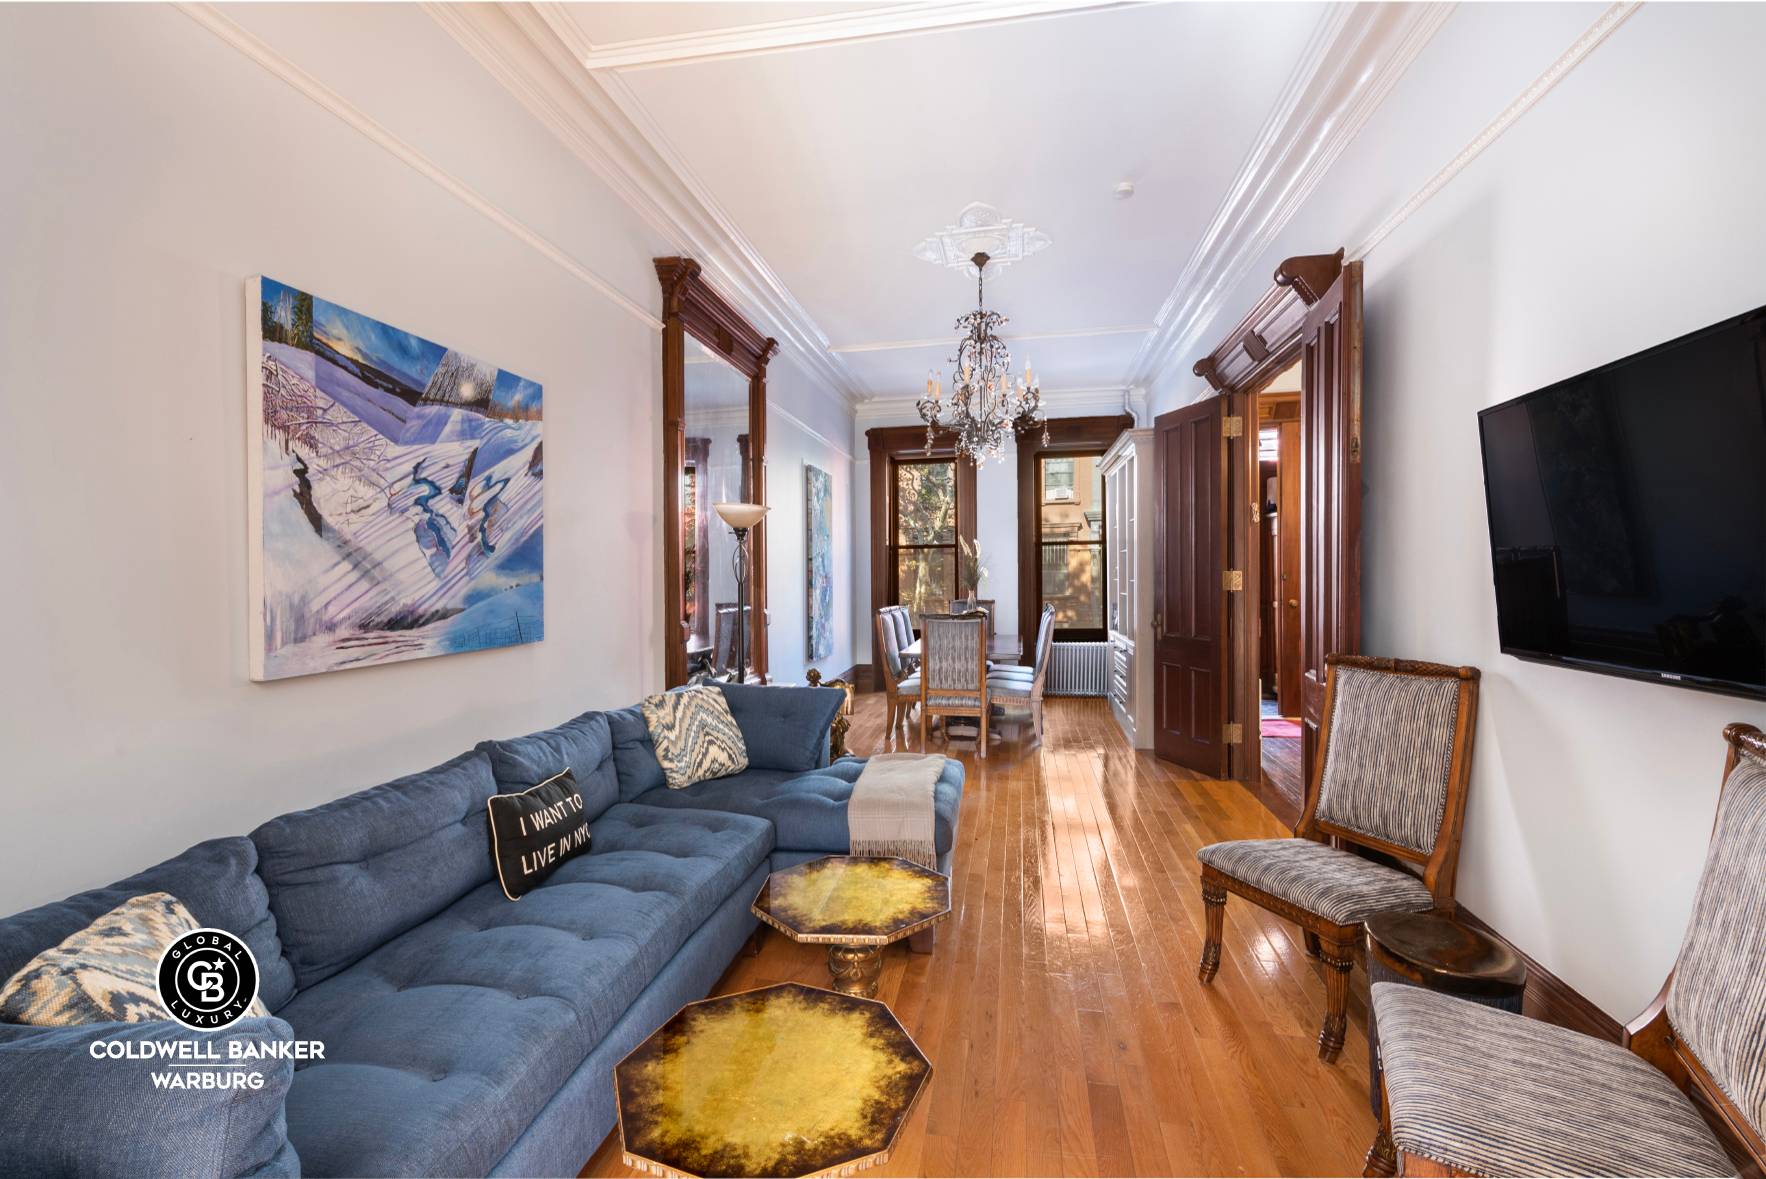 This furnished rental is the perfect home for you, right in the middle of a beautiful neighborhood on a serene brownstone block.